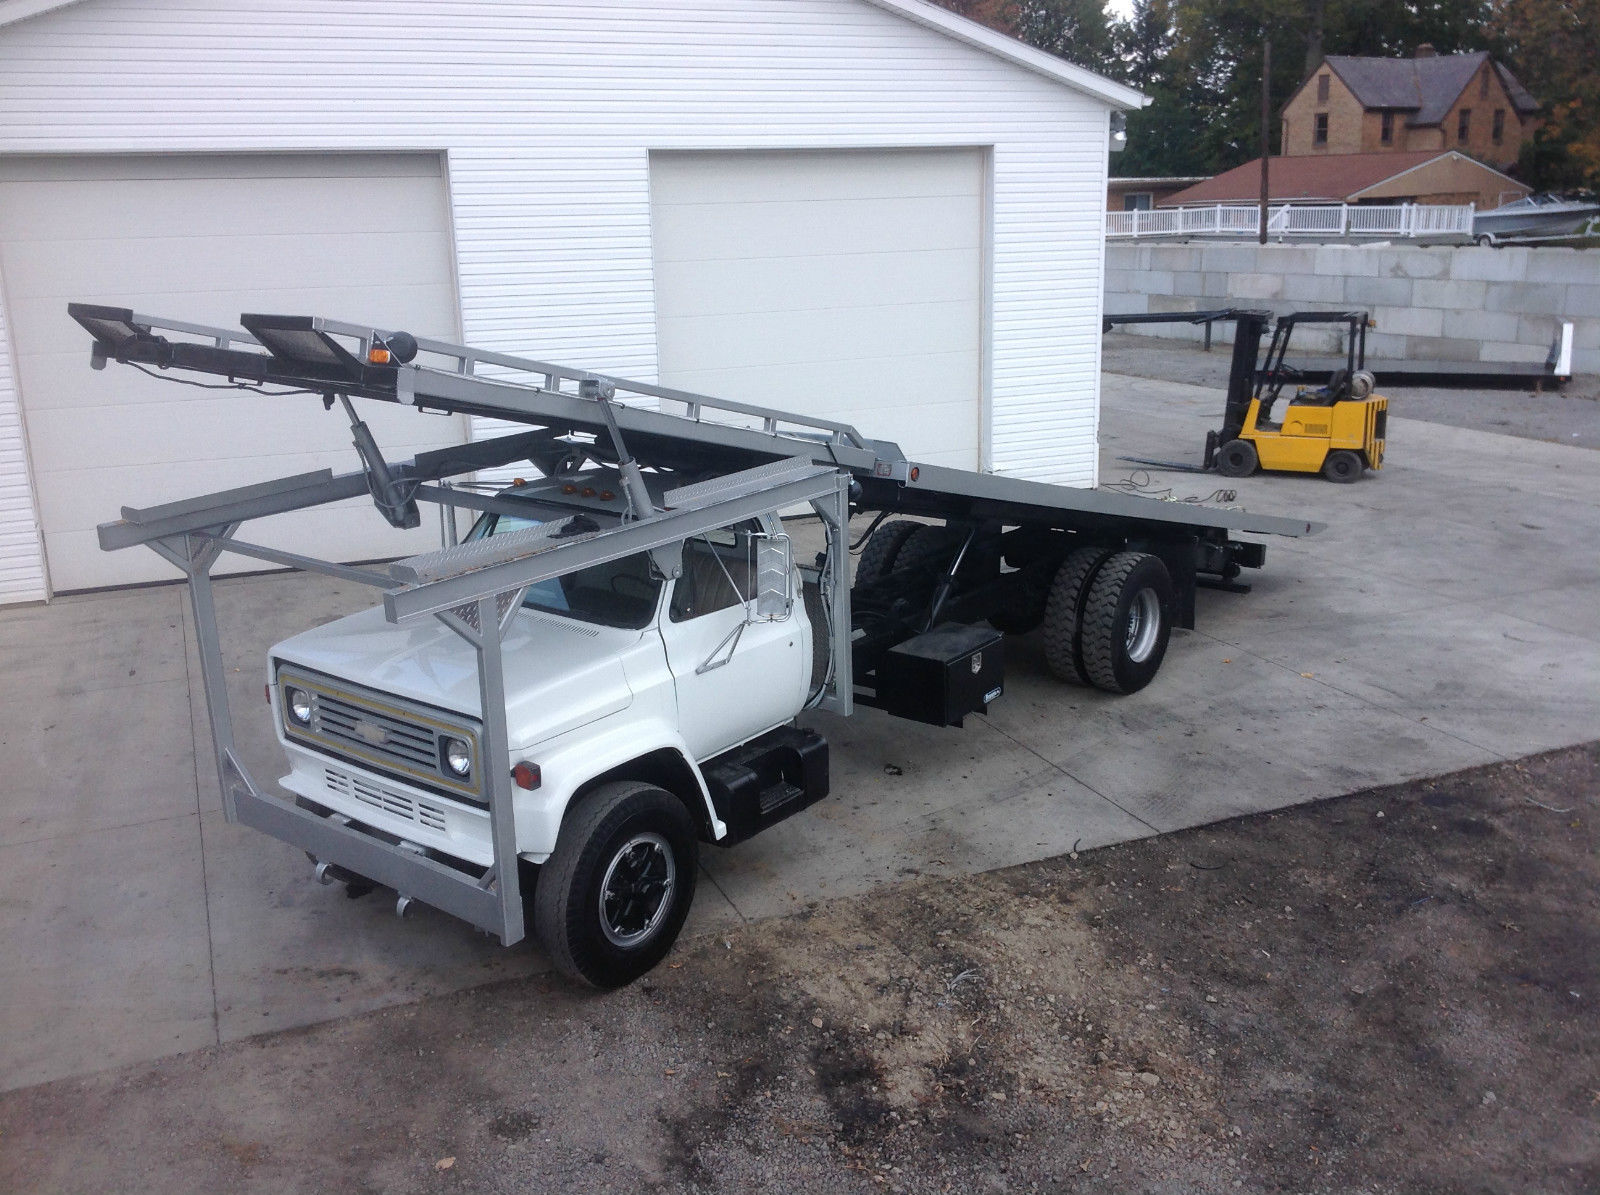 This 1981 Chevy C80 Is A Four Car Hauler/Rolling Stunt Launch Ramp You Have Always Wanted